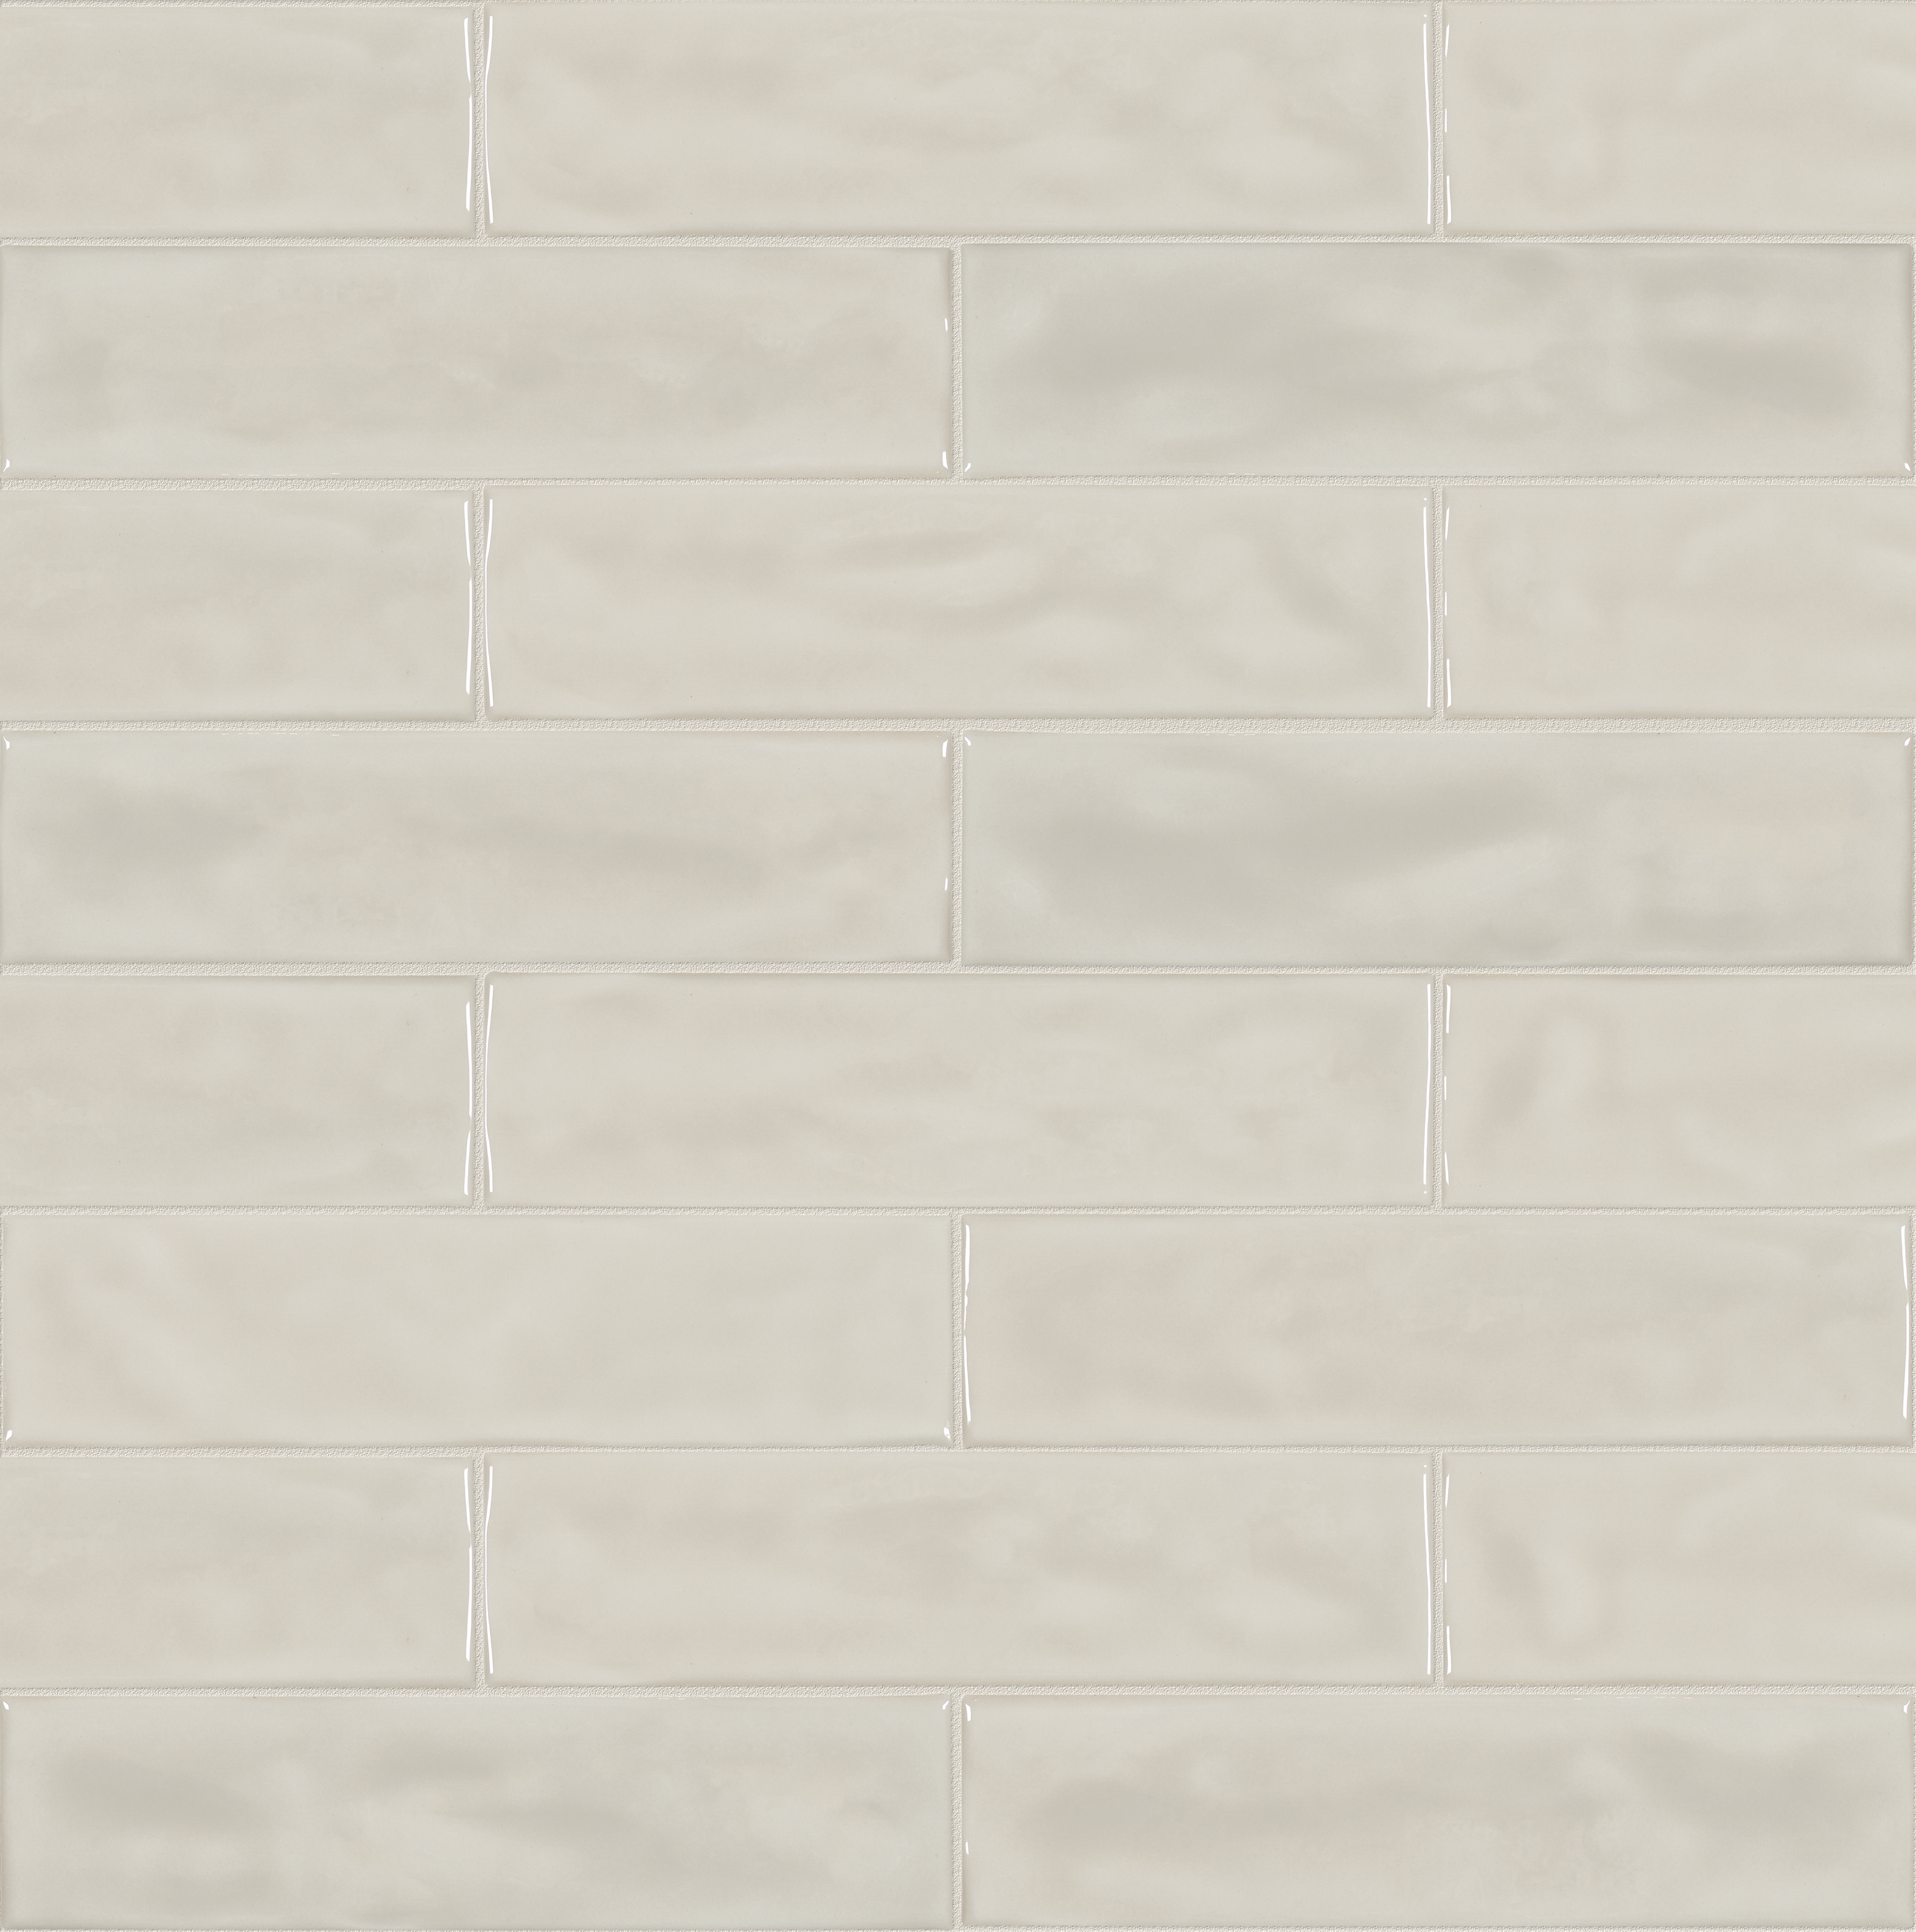 desert pattern glazed ceramic field tile from marlow anatolia collection distributed by surface group international glossy finish pressed edge 3x12 rectangle shape